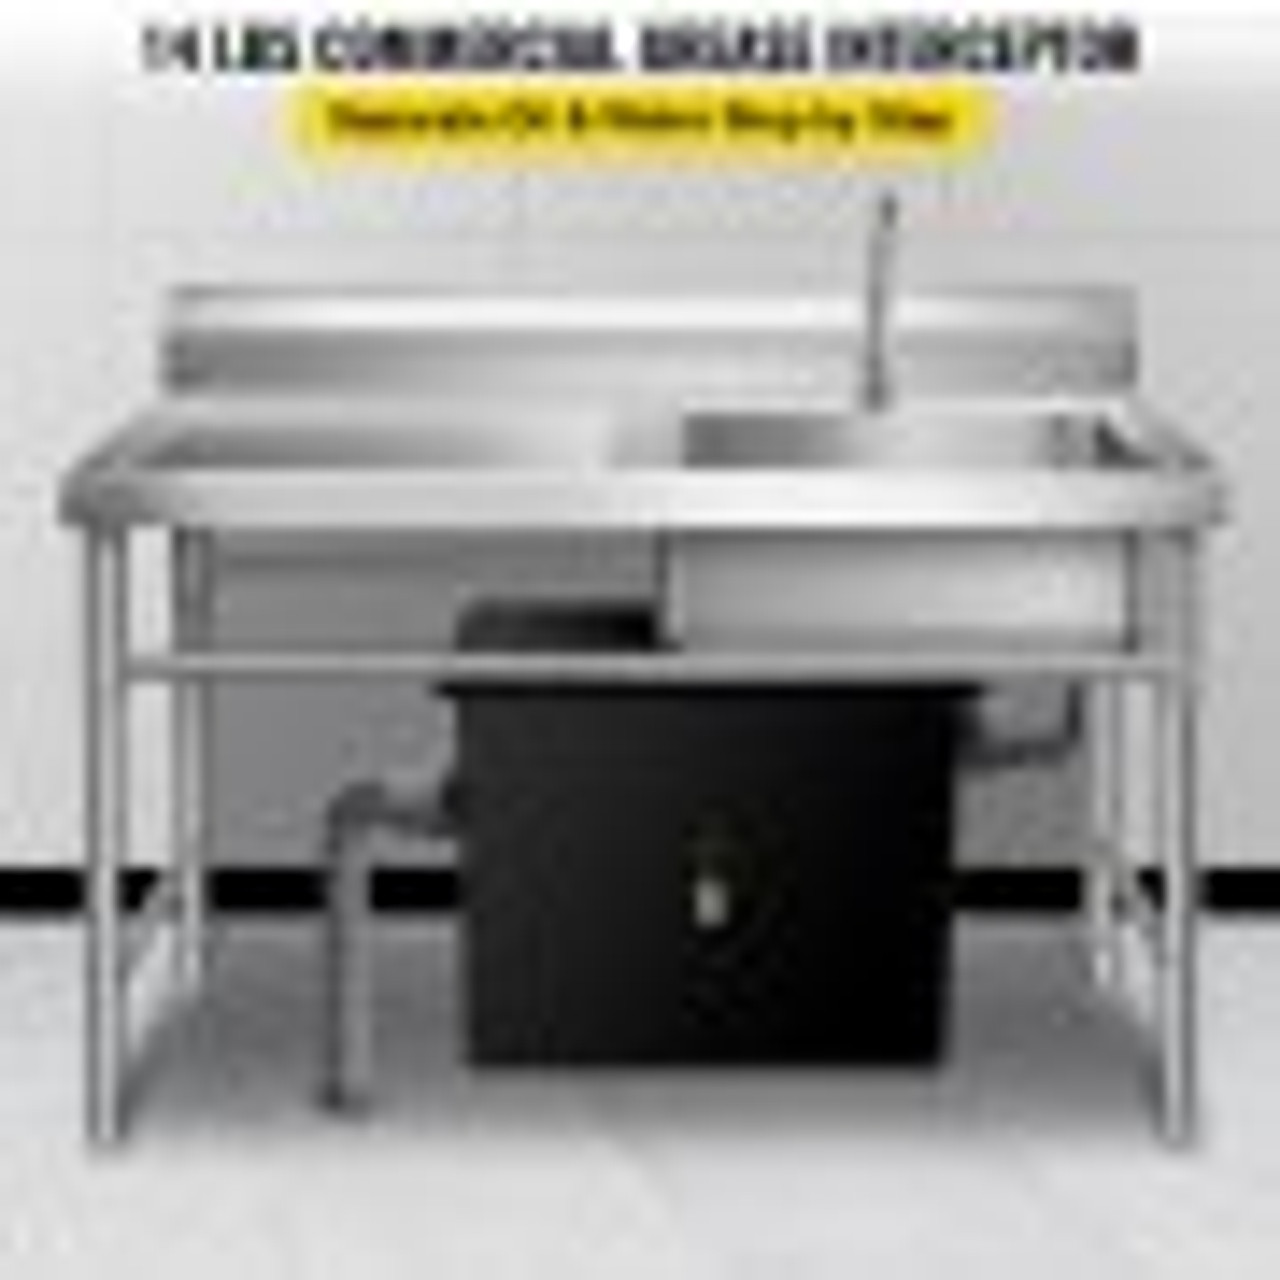 Commercial Grease Interceptor 14 LB, Carbon Steel Grease Trap 7 GPM, Grease Interceptor Trap with Side Water Inlet, Under Sink Grease Trap for Restaurant Canteen Factory Home Kitchen